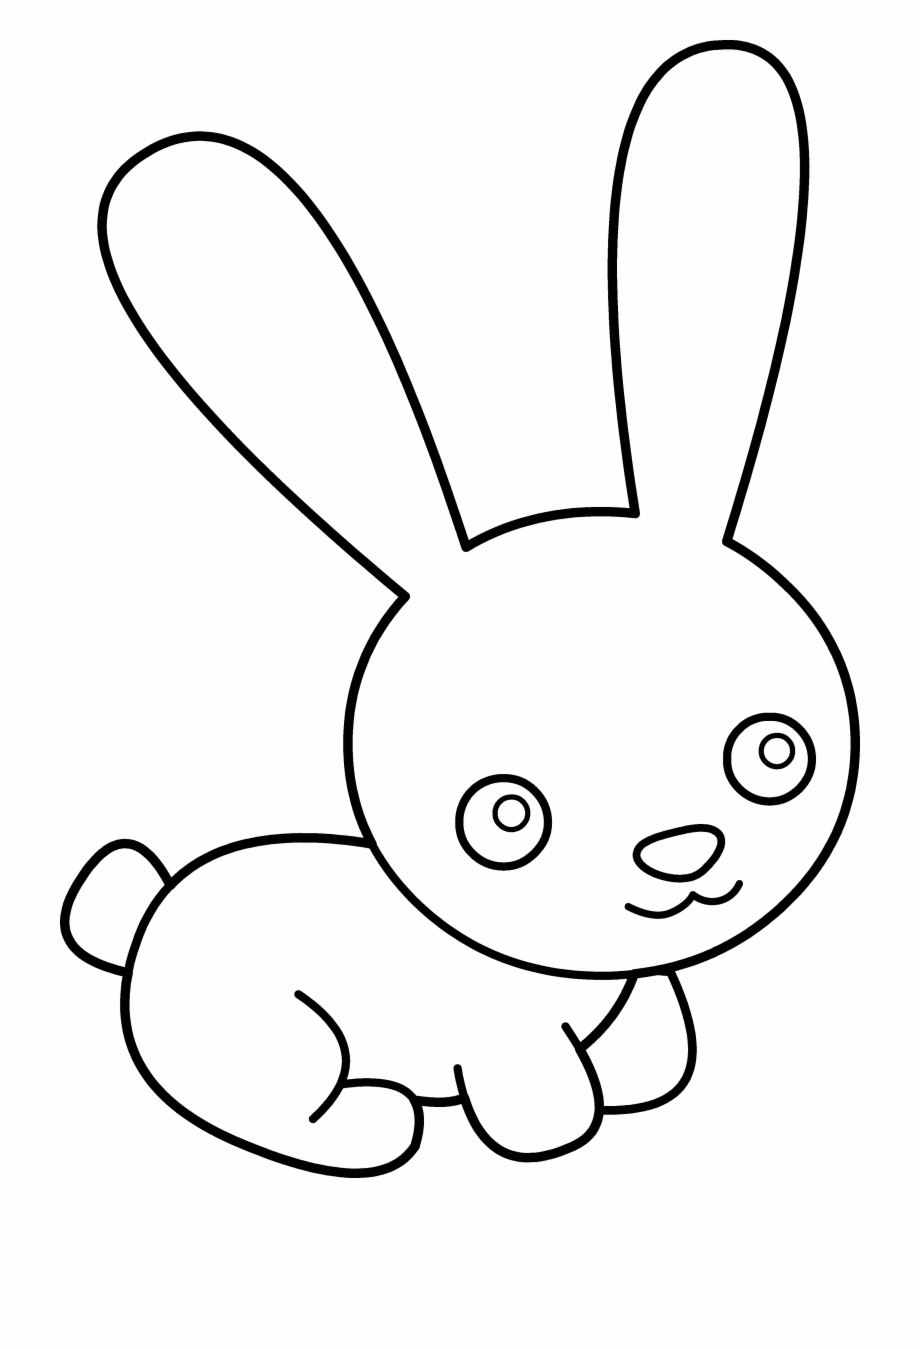 bunnies clipart black and white